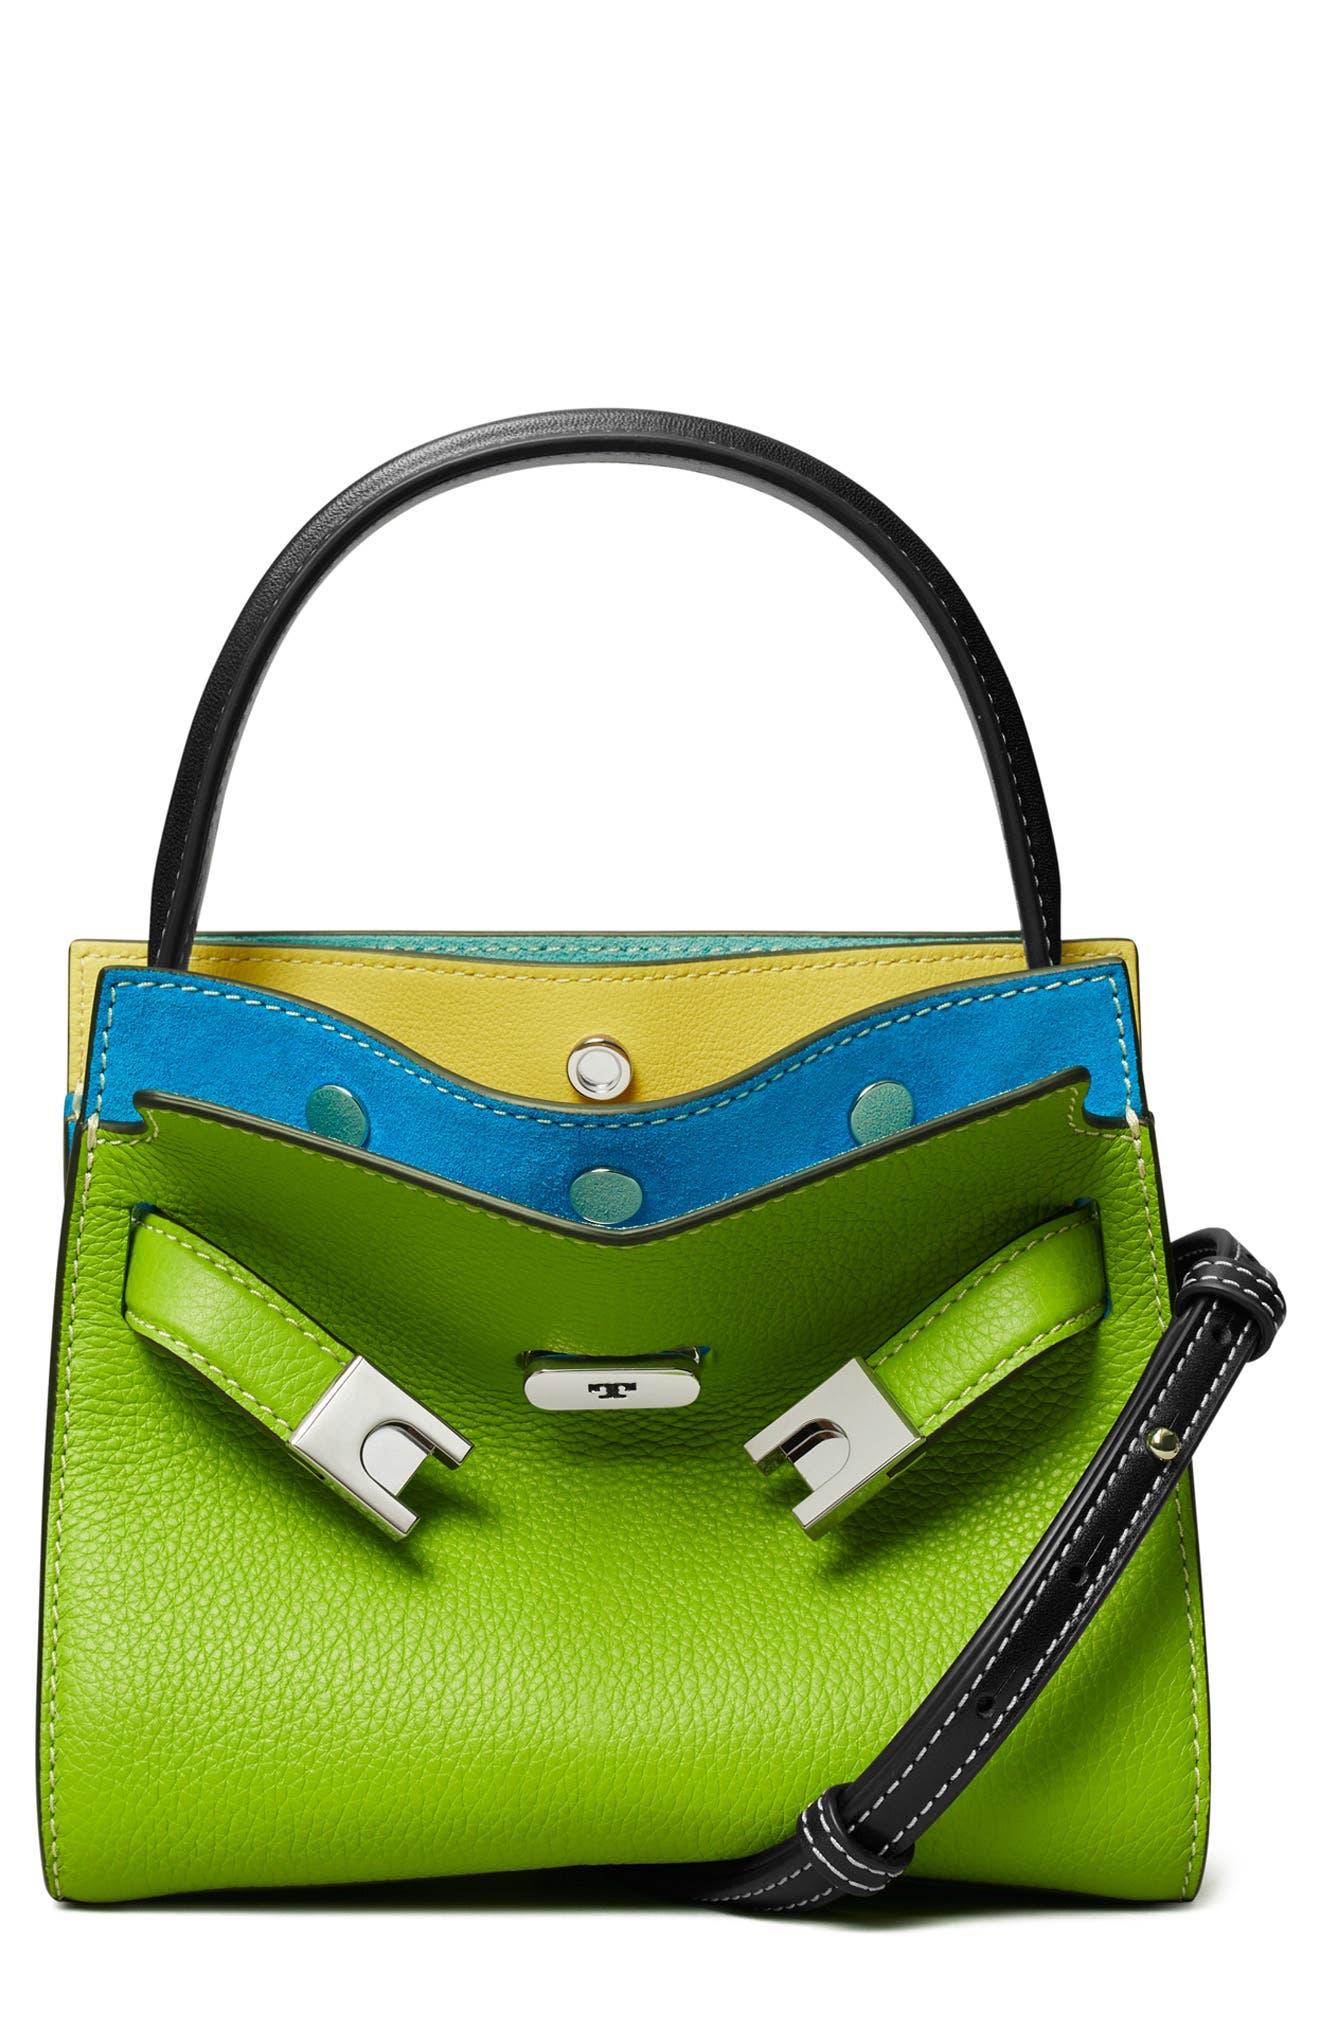 Tory Burch Petite Lee Radziwill Pebble Leather Double Bag in Green | Lyst